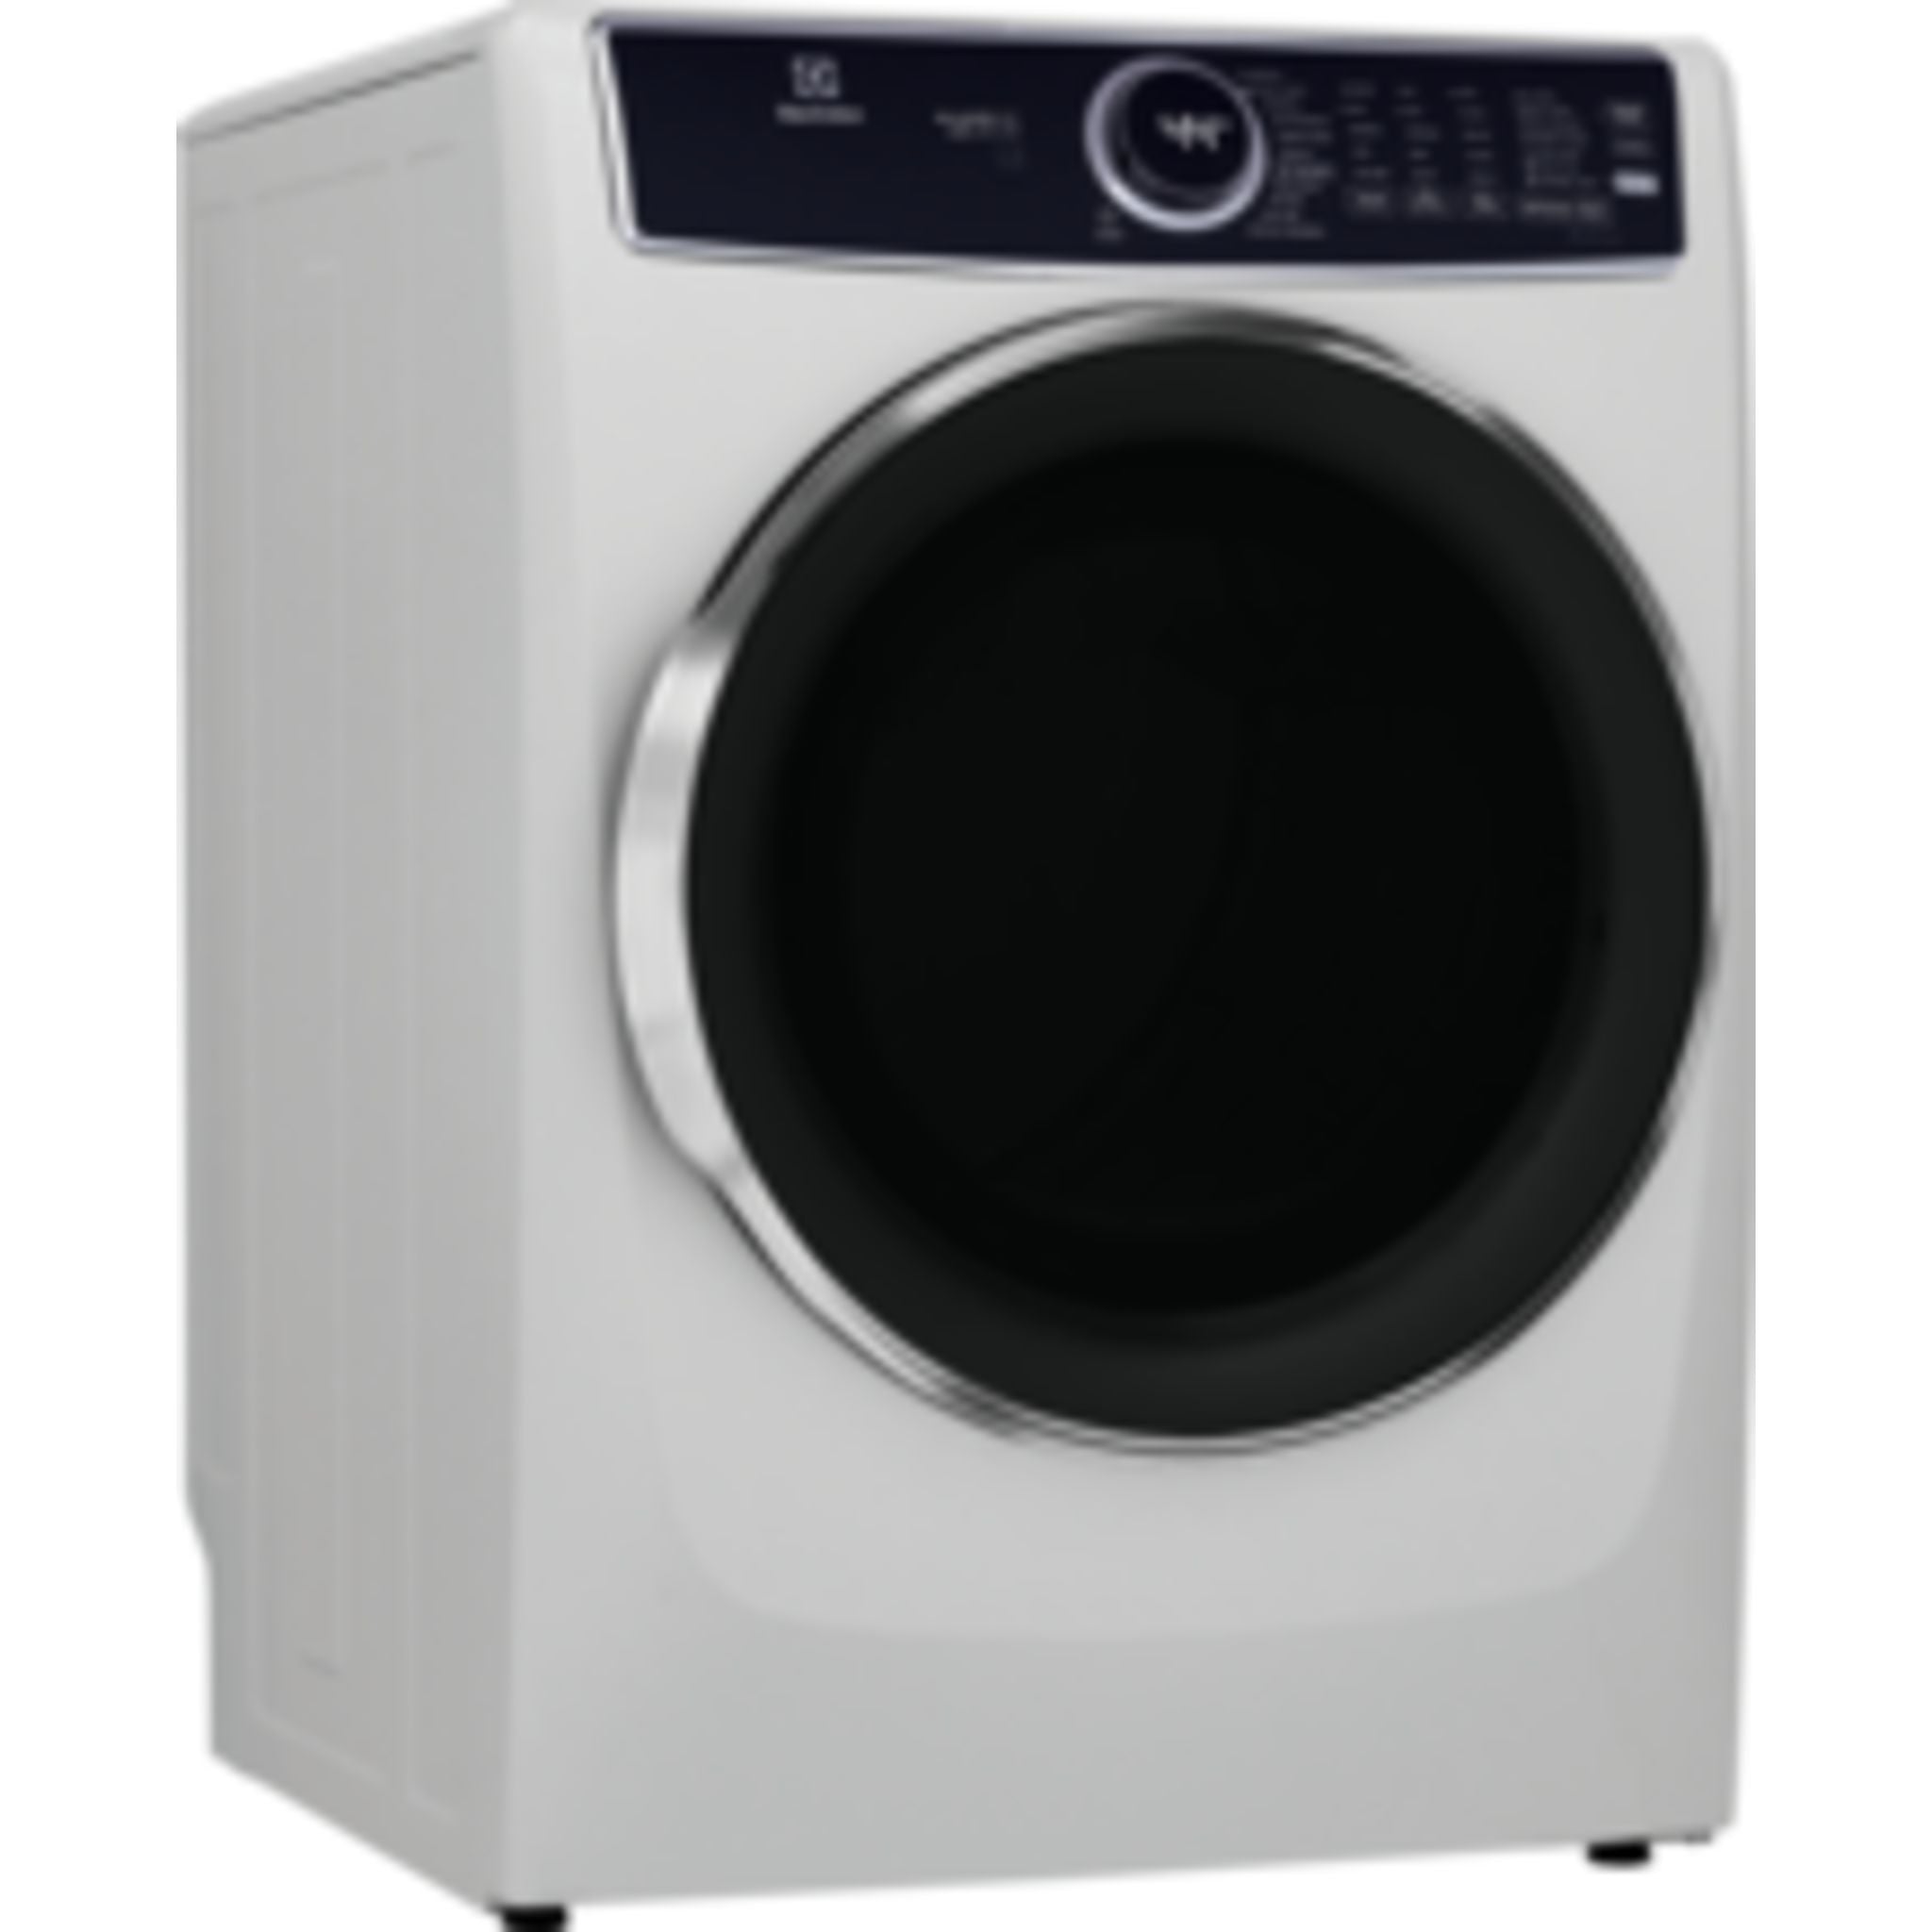 Electrolux Home Products, Electrolux Dryer (ELFE763CAW) - White